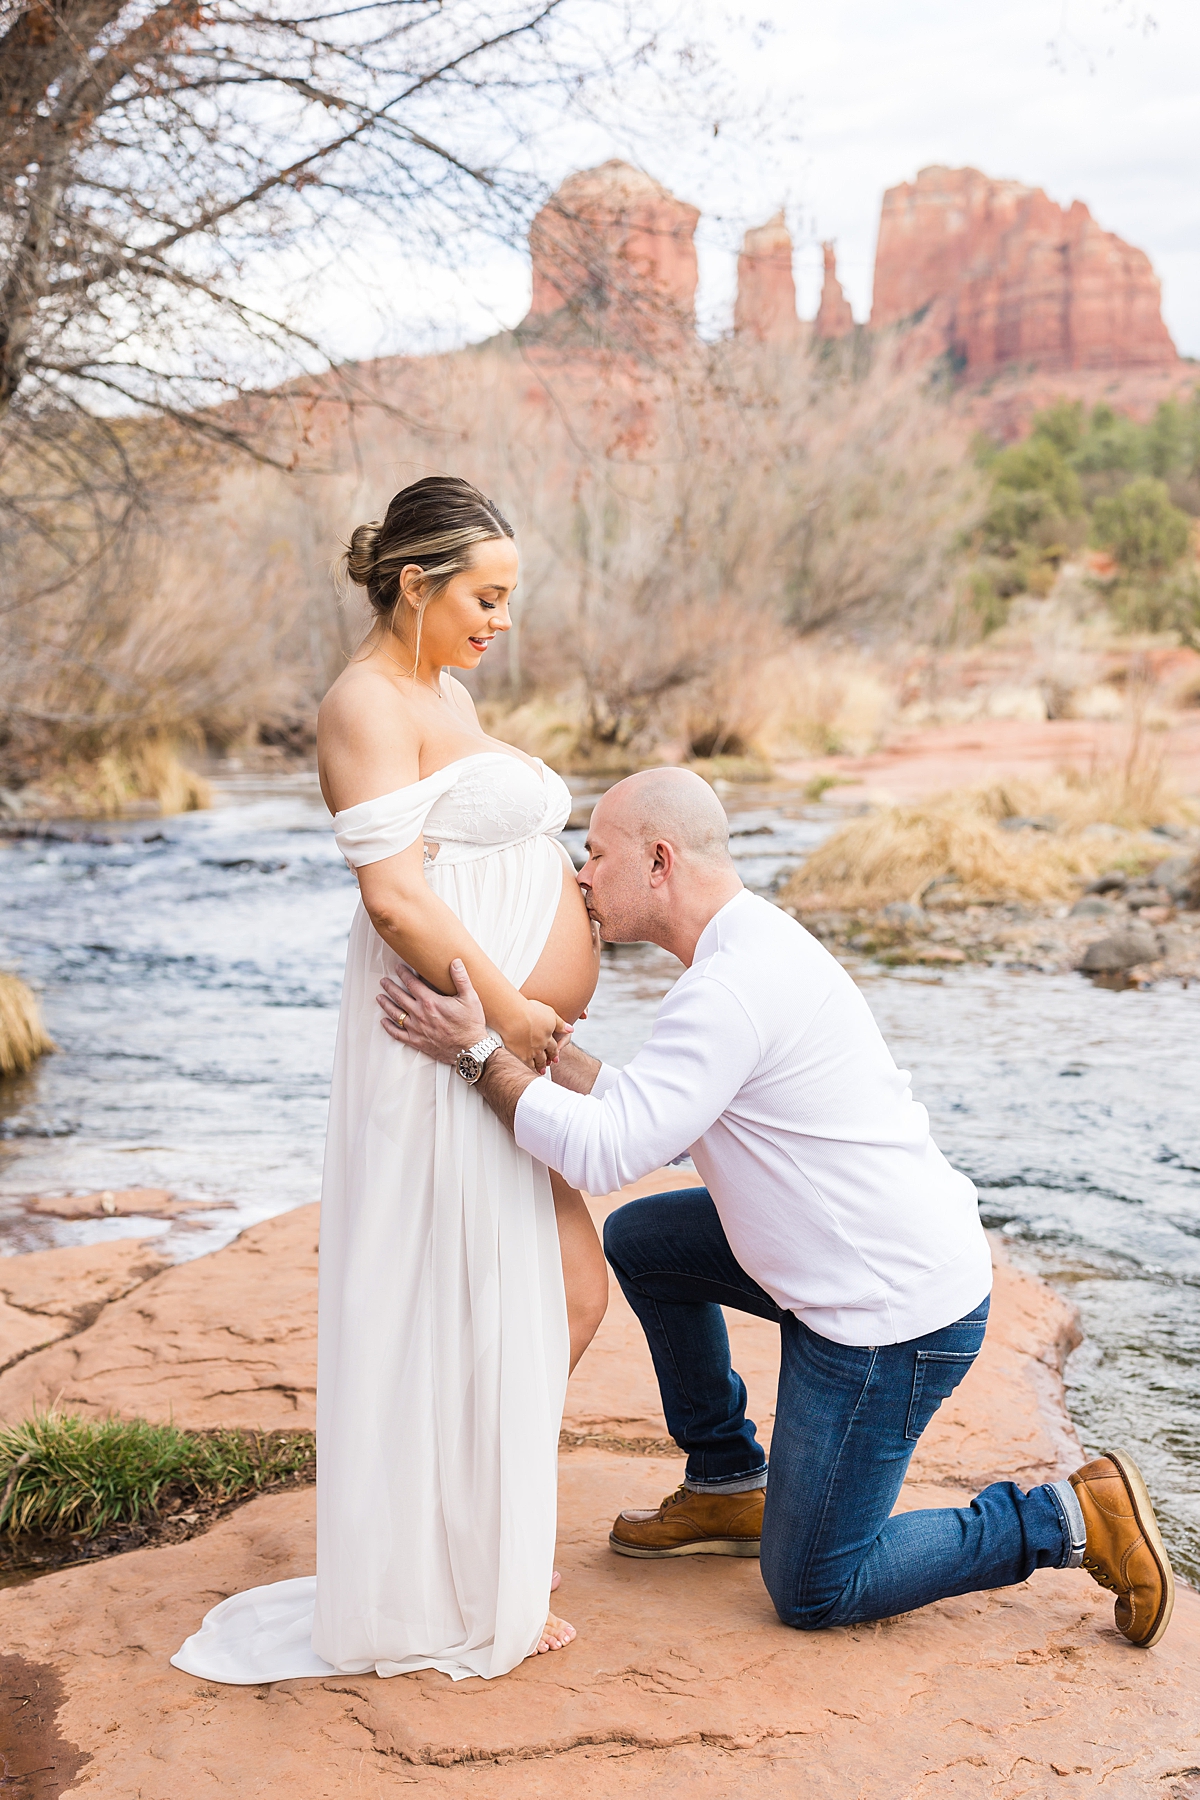 Leah Hope Photography | Scottsdale Arizona Maternity Photographer | Sedona Arizona Pregnancy Photos | Red Rock Desert Mountains | Creek Water Pictures | Maternity Photos | What to Wear | Maternity Poses and Posing | Maternity Photographer | Motherhood Photography | Outfit and Styling Ideas | Bump Pictures | Pregnancy Pictures | Baby Bump